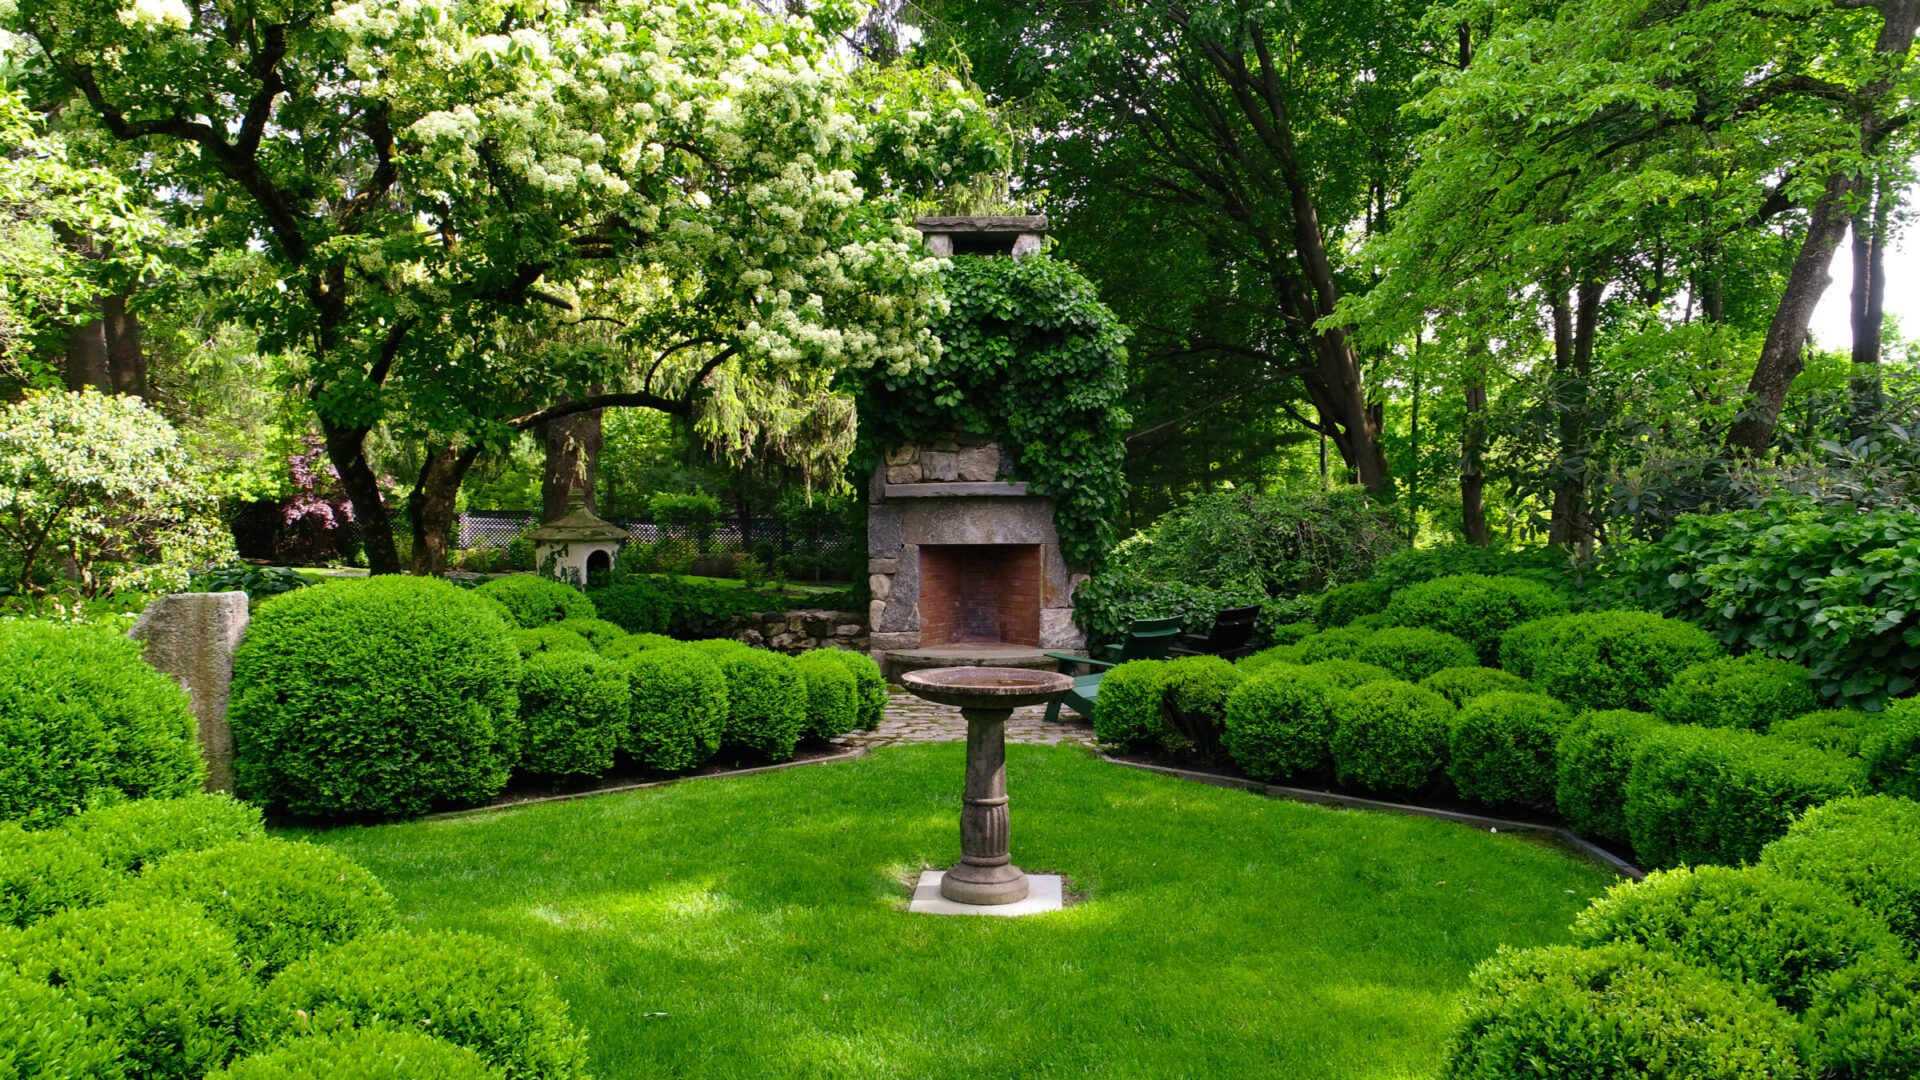 A lush garden with neatly trimmed bushes, a birdbath centerpiece, a stone fireplace covered in vines, surrounded by a variety of green trees.